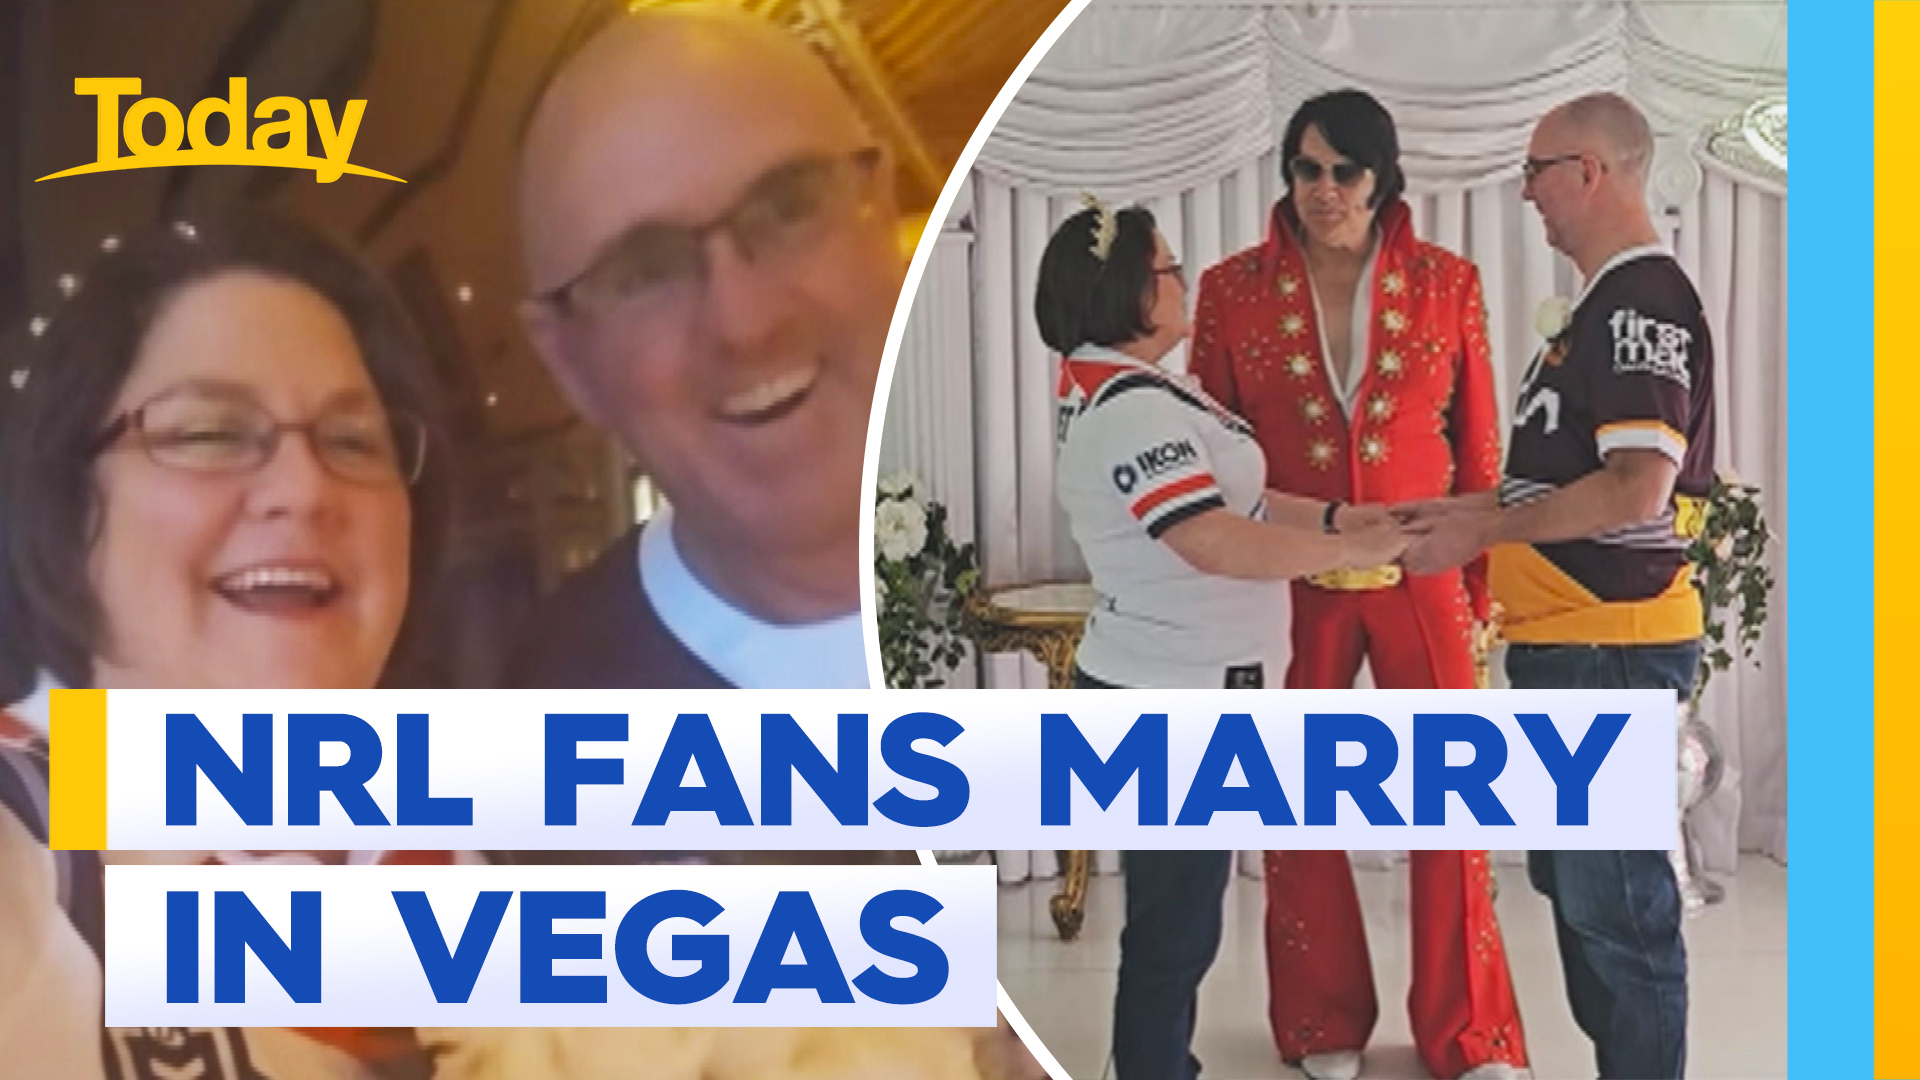 NRL fans get hitched during Vegas Round